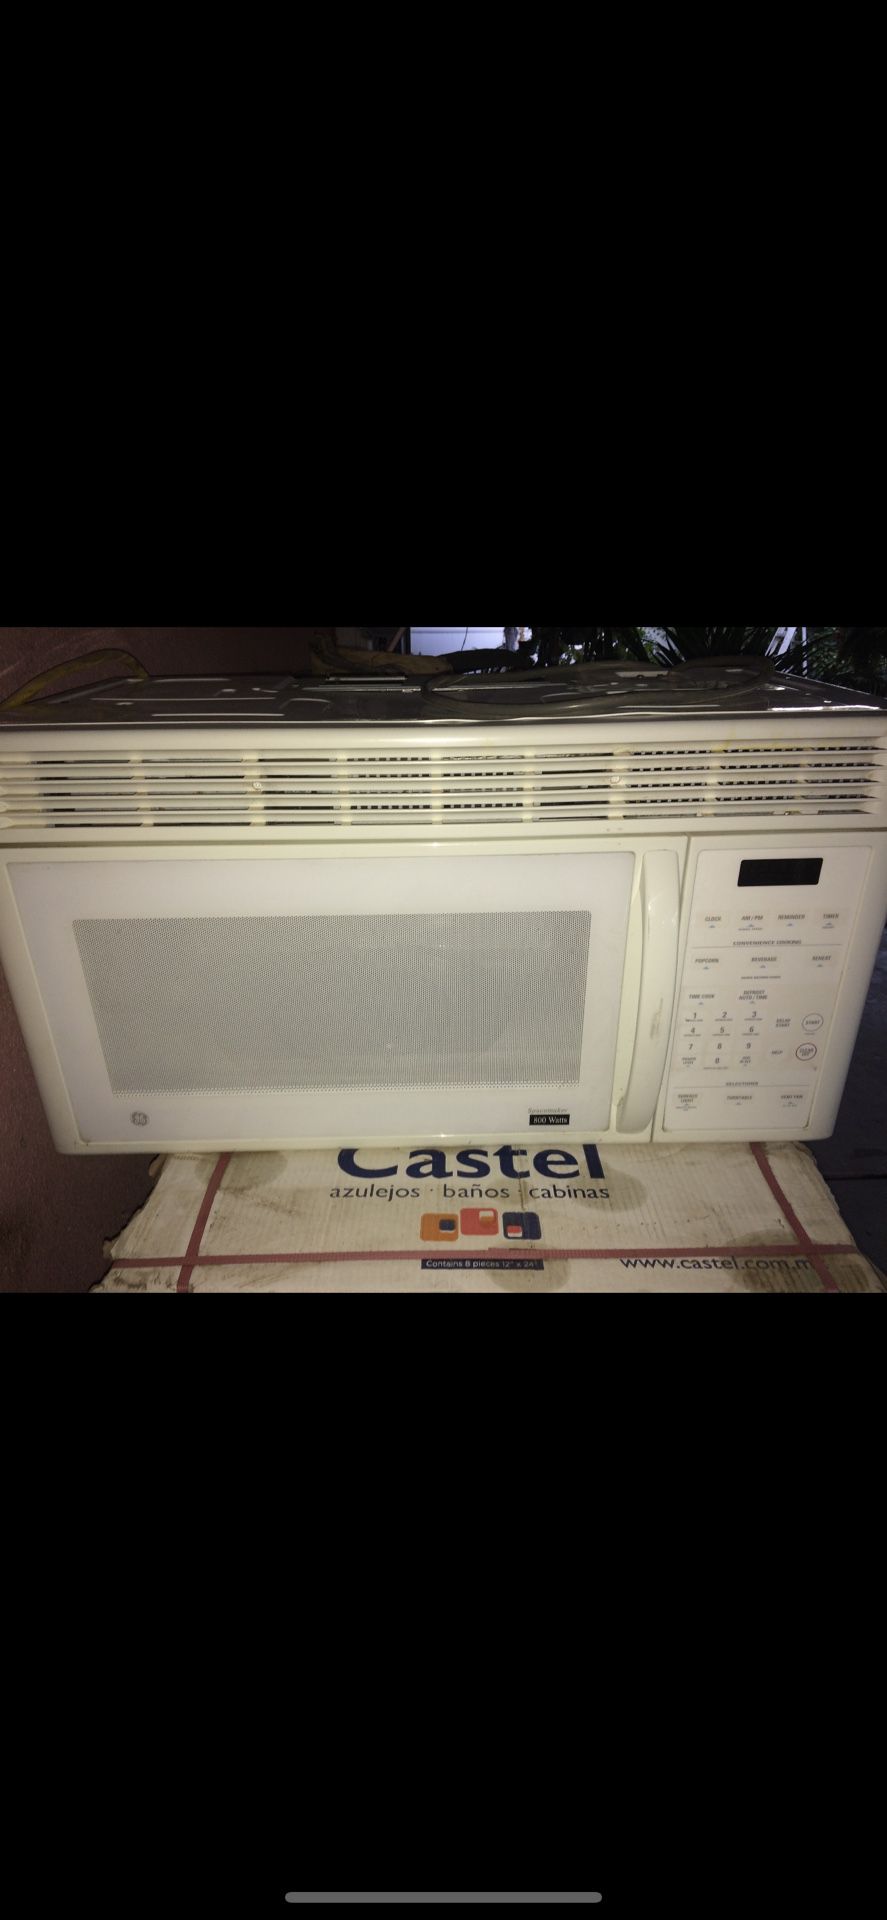 GE microwave with built in exhaust fan